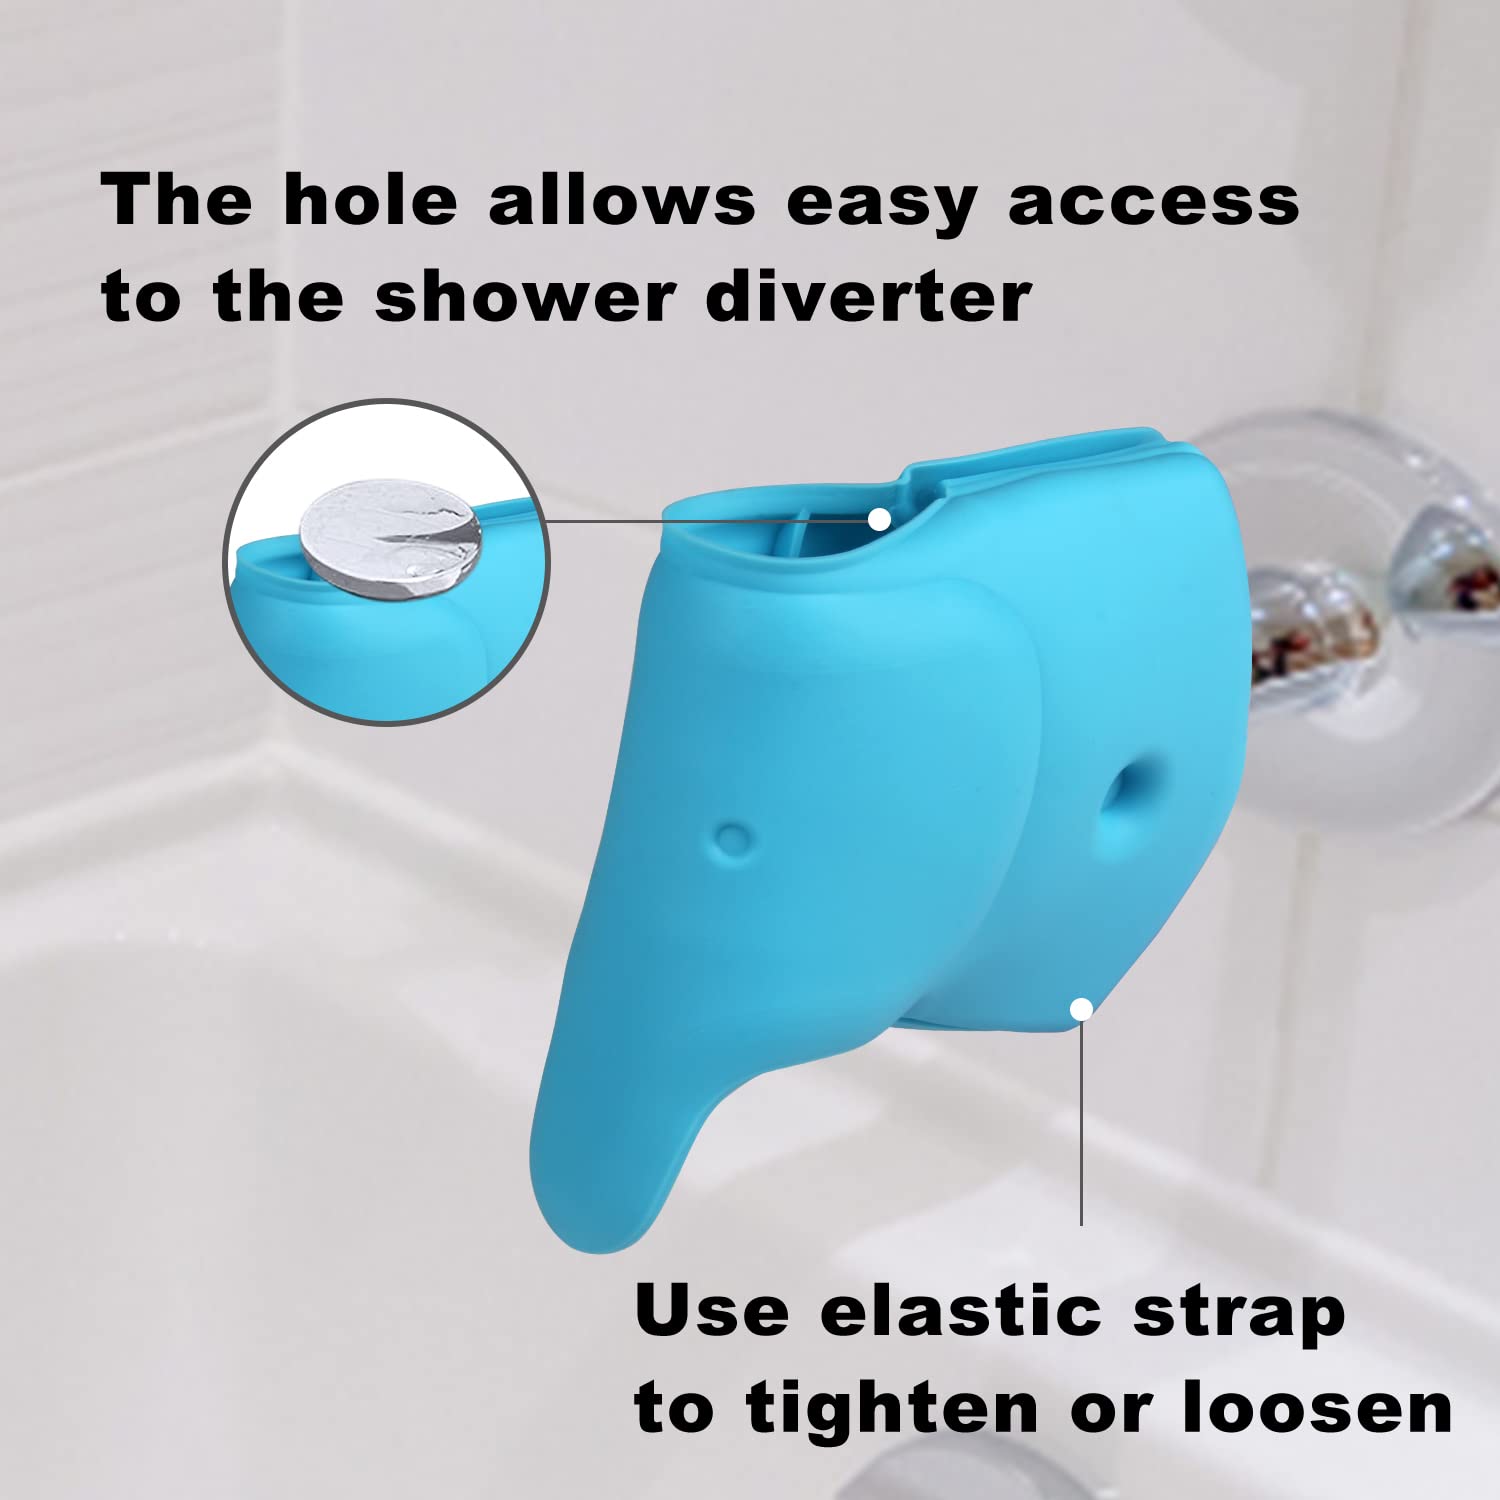 Bath Spout Cover - Faucet Cover Baby - Tub Spout Cover Bathtub Faucet Cover for Kids -Tub Faucet Protector for Baby - Silicone Spout Cover Blue Elephant - Kids Bathroom Accessories - Free Bathtub Toys